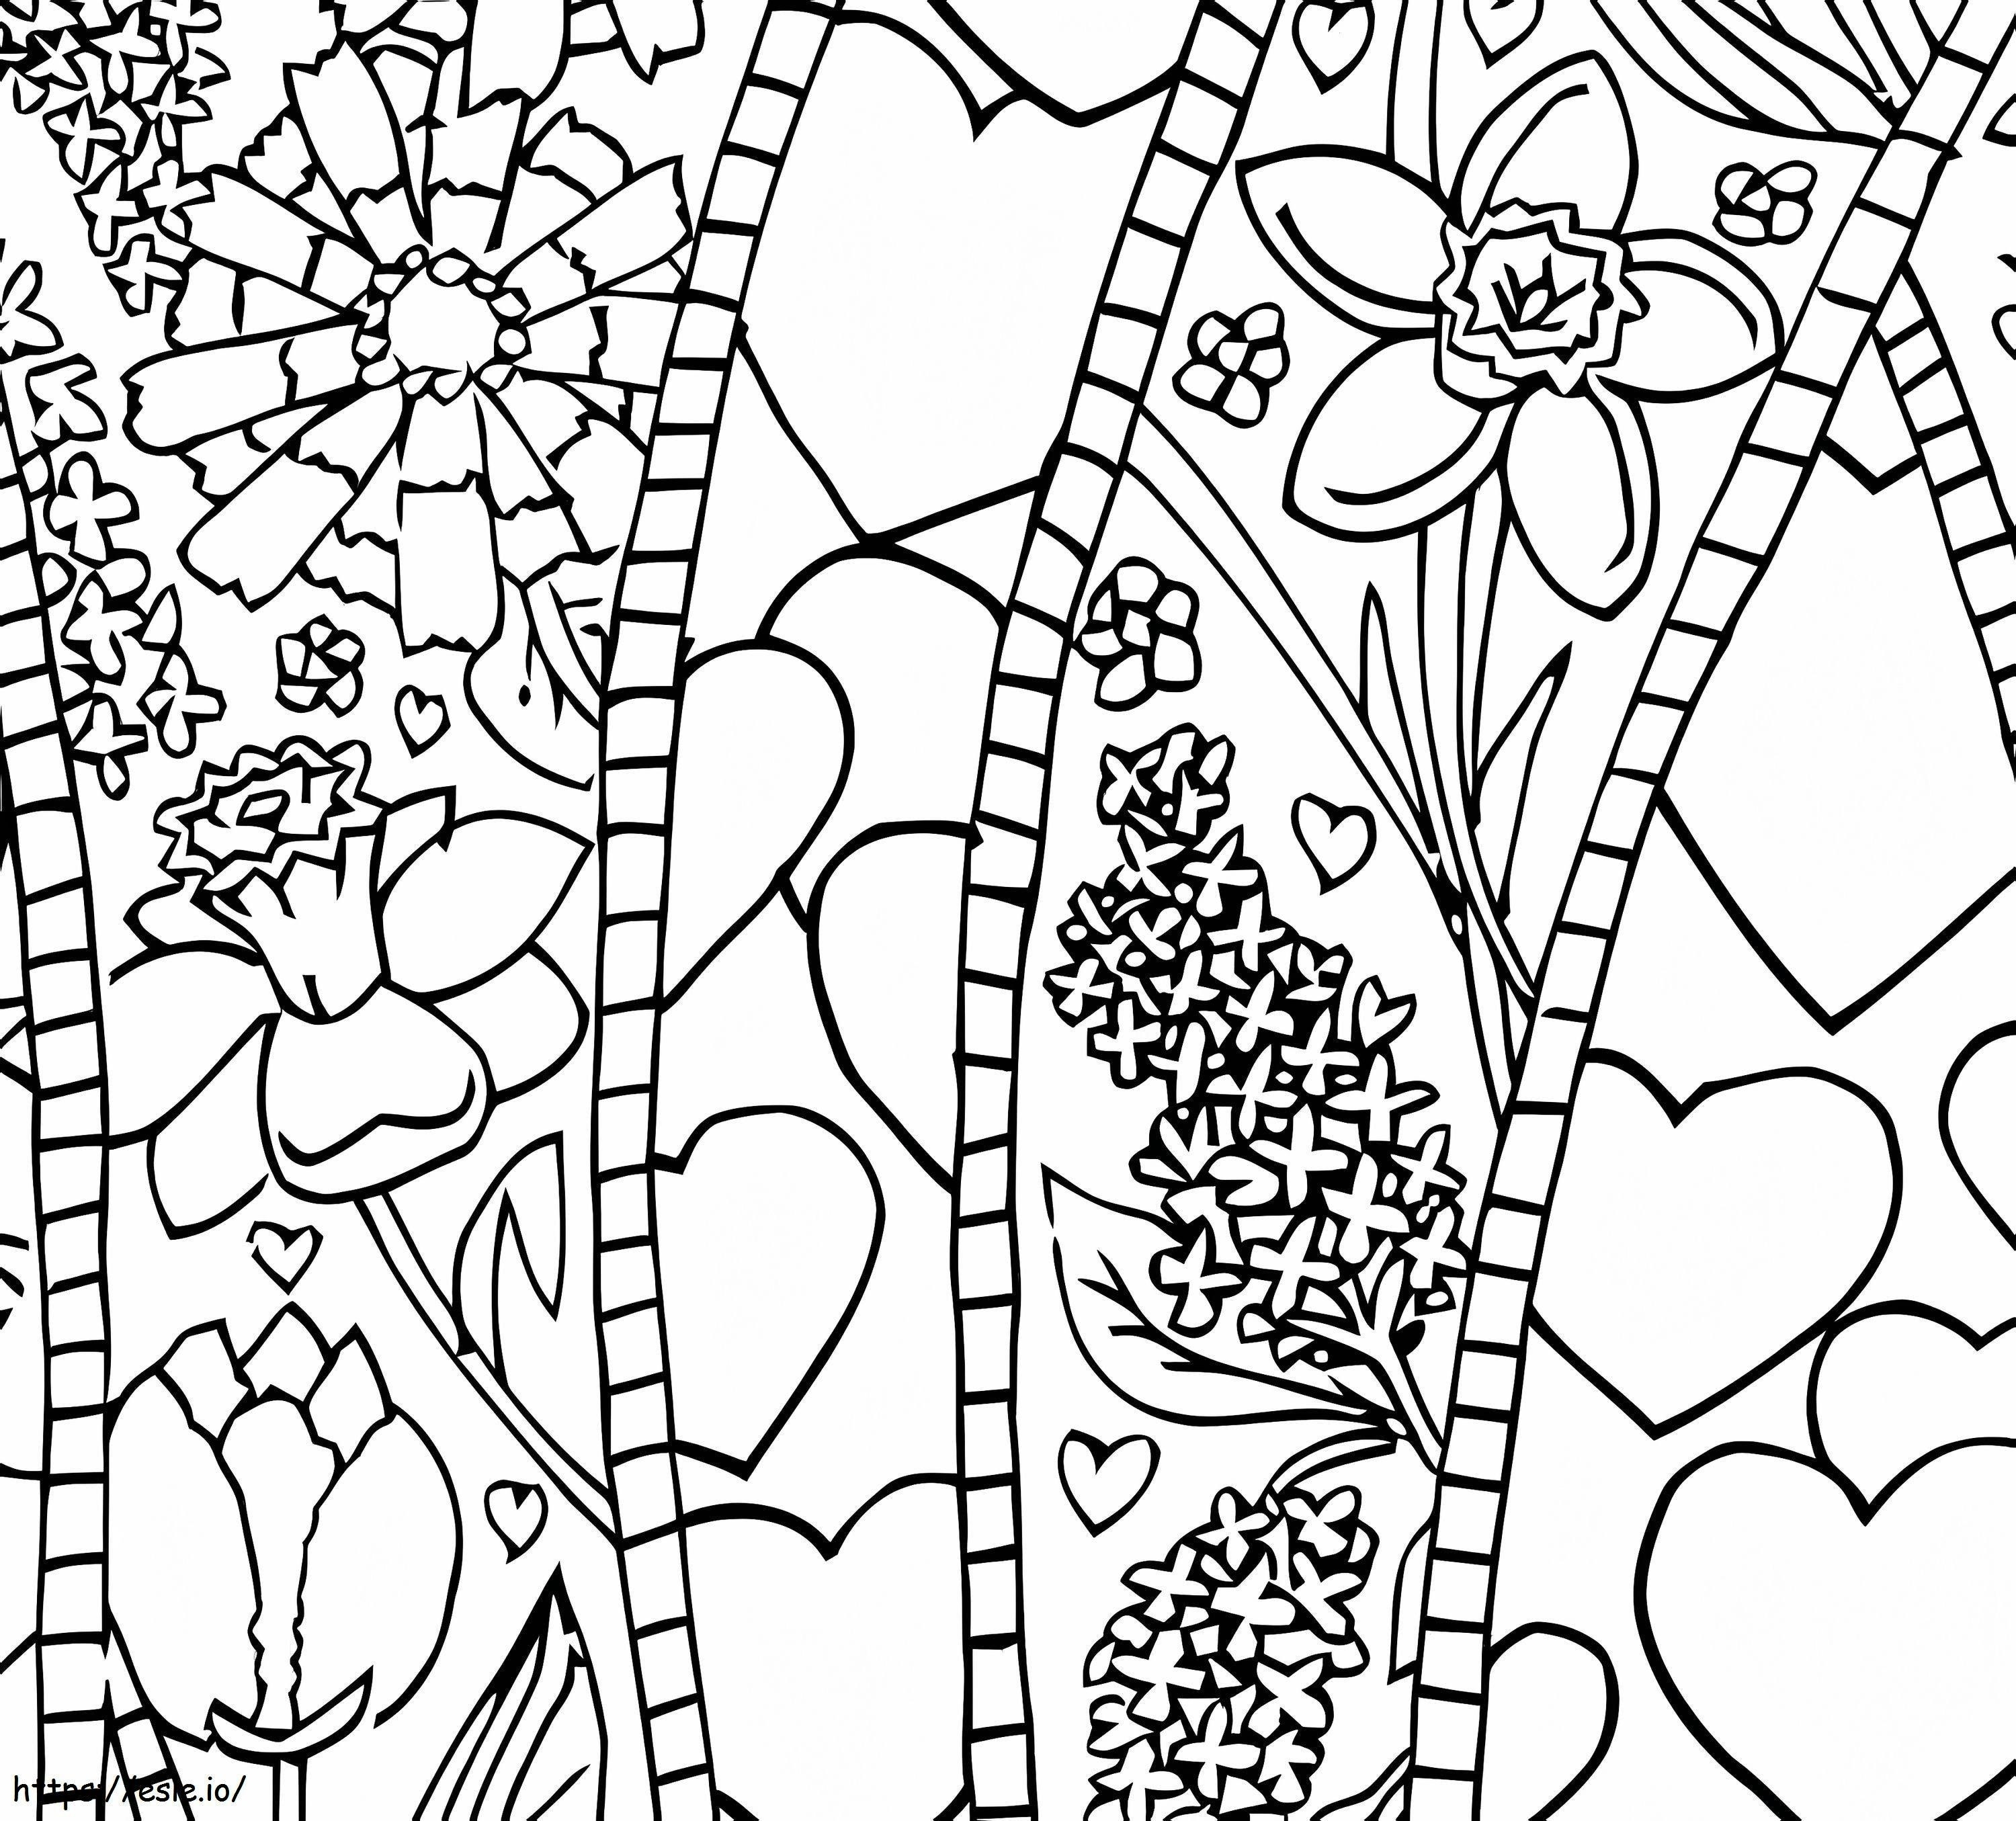 Mindfulness 2 coloring page